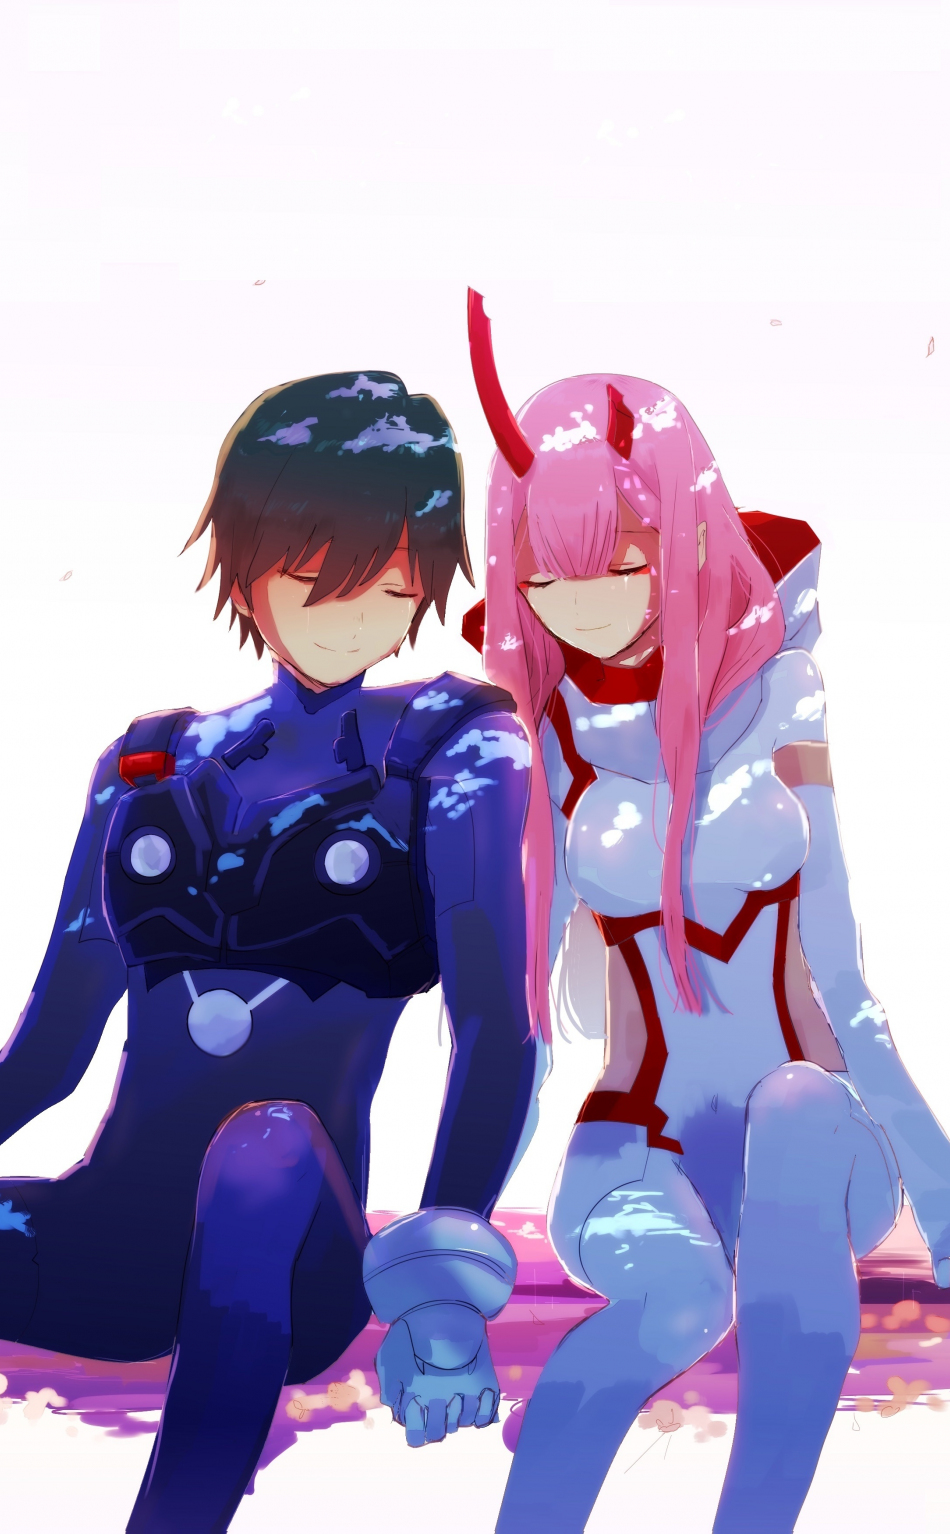 Wallpaper ID 391236  Anime Darling in the FranXX Phone Wallpaper Zero Two  Darling In The FranXX 1080x1920 free download